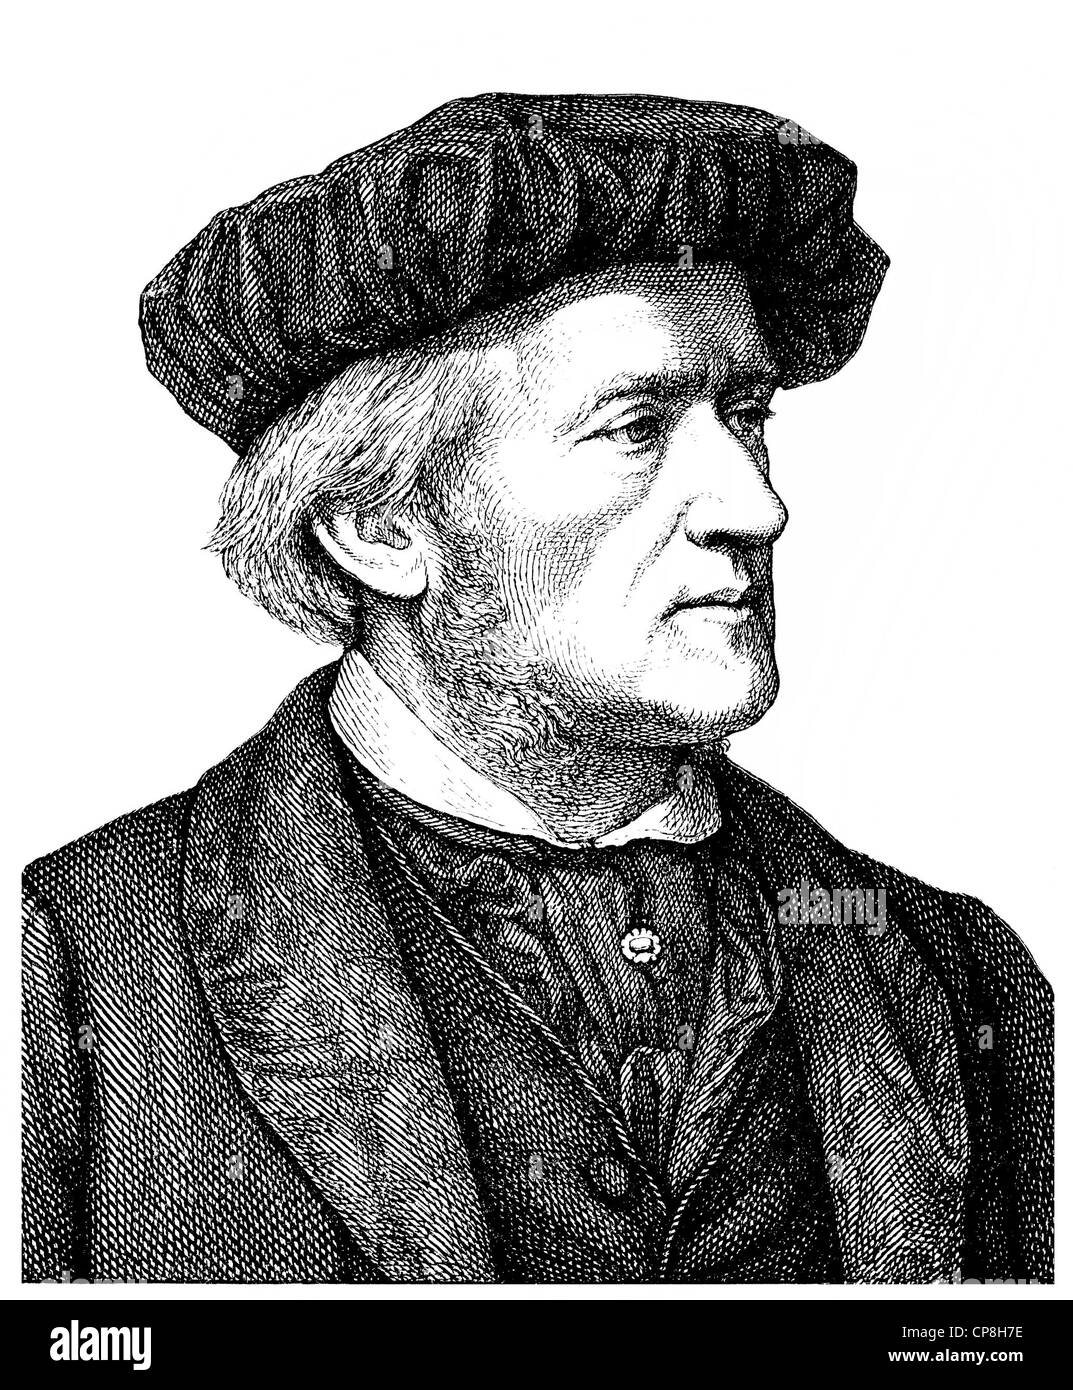 Wilhelm Richard Wagner 1813 - 1883, a German composer, playwright, philosopher, poet, writer, theater director and conductor, Hi Stock Photo